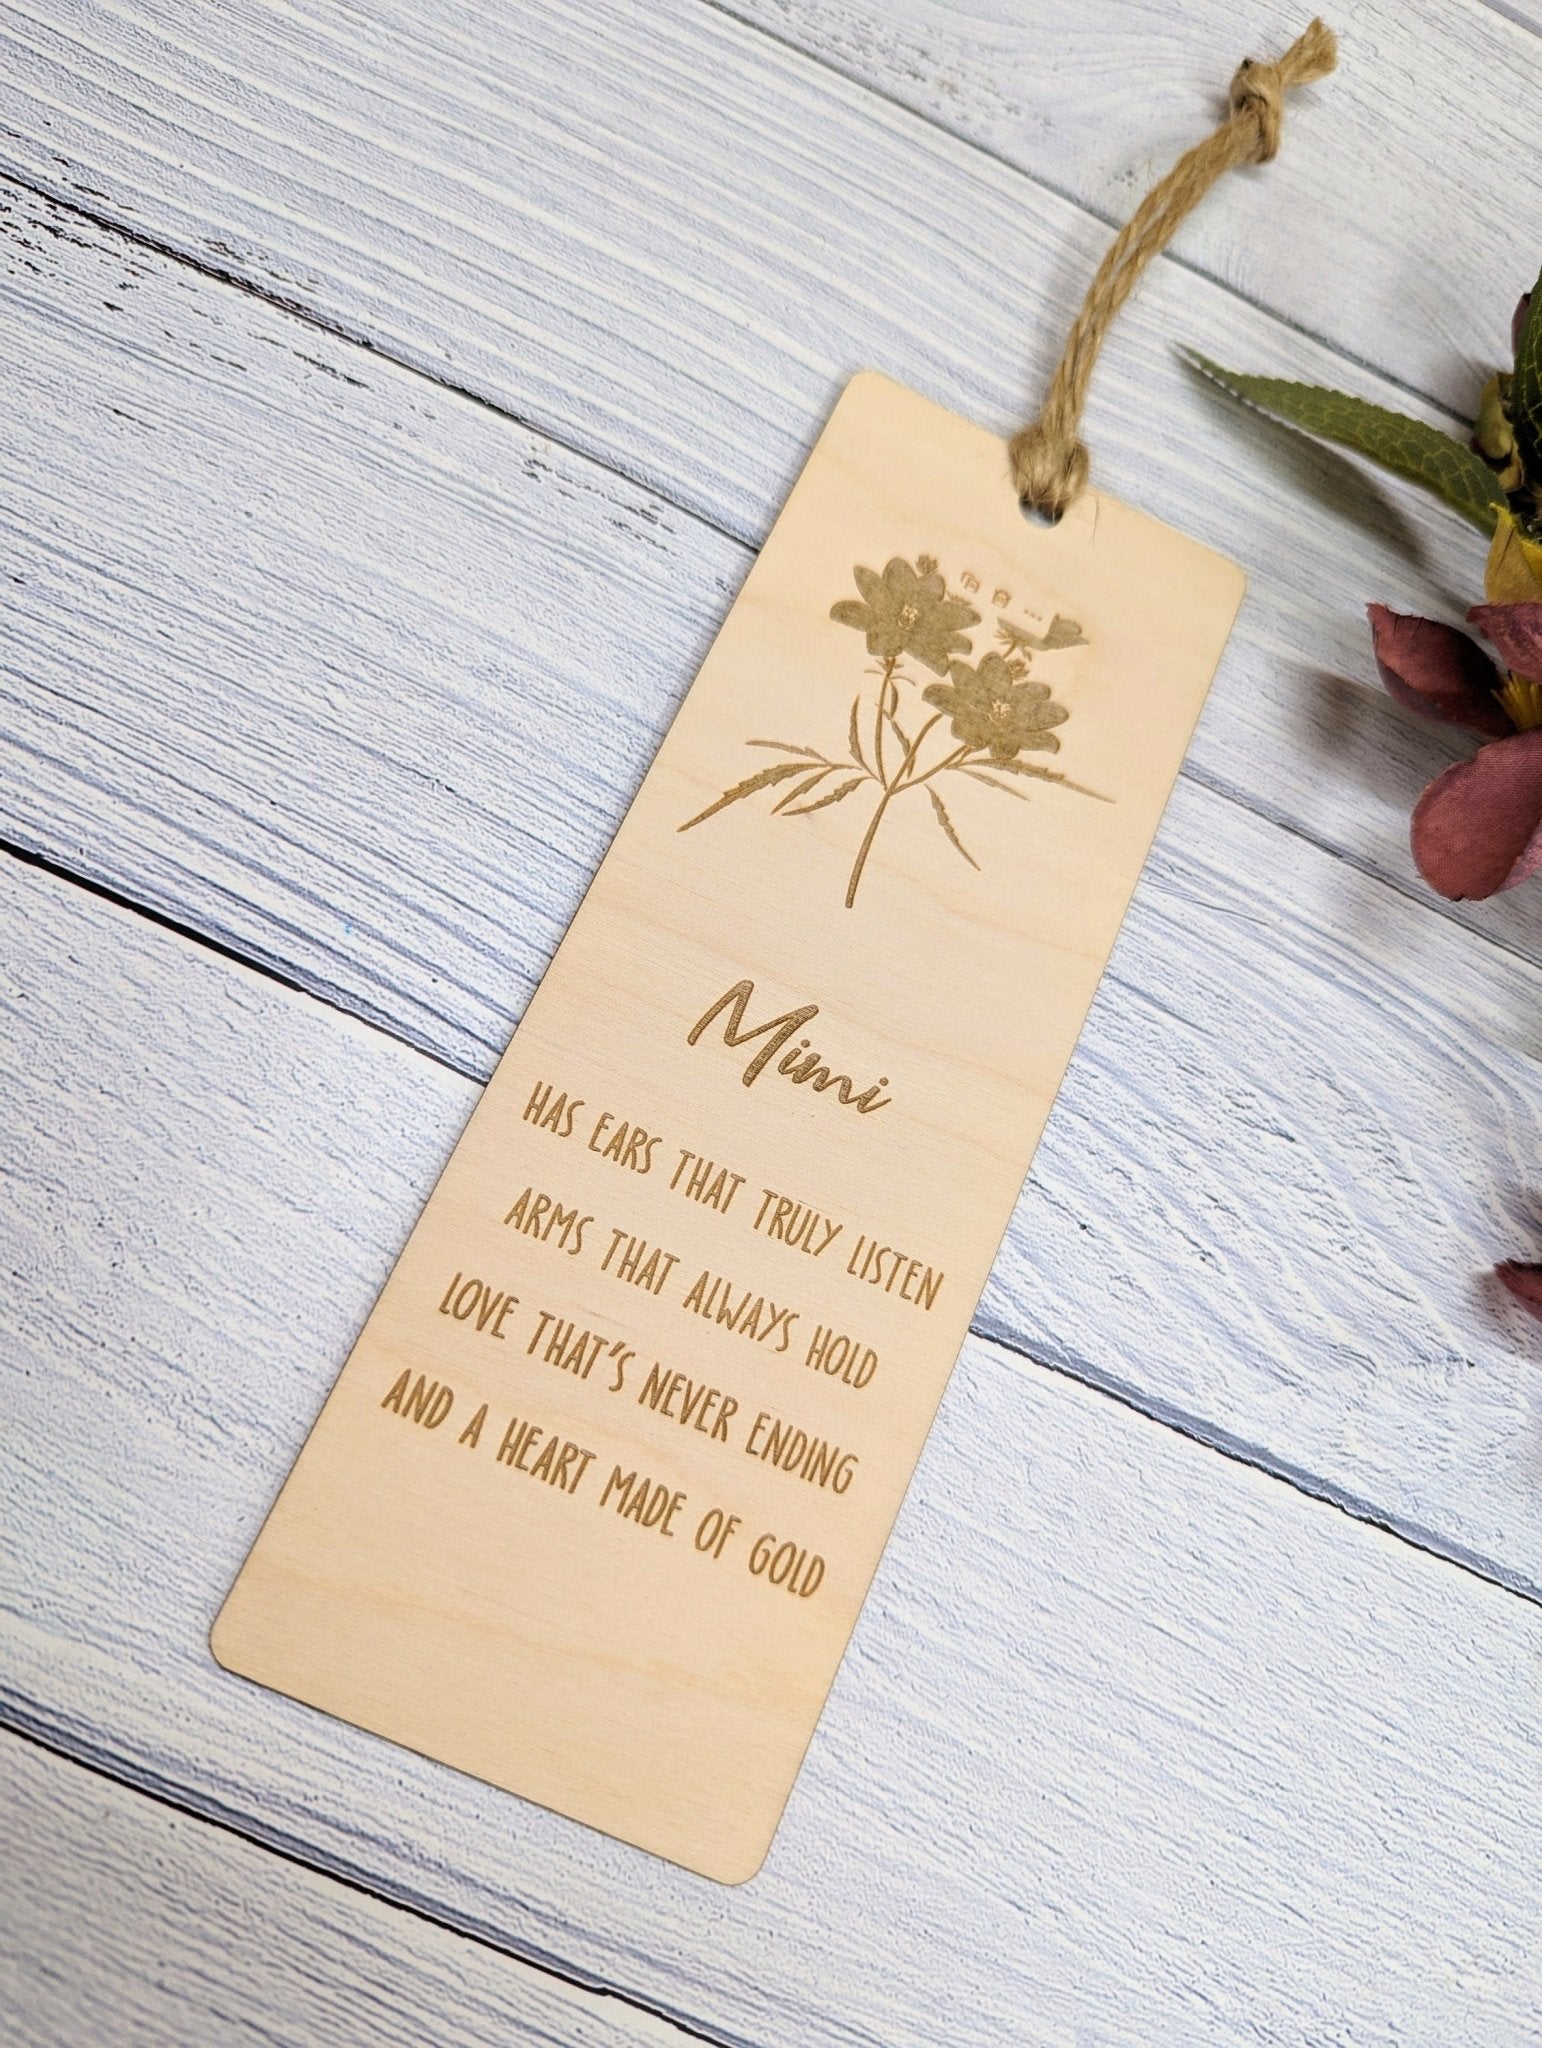 Personalised Wooden Bookmark for Grandparents with Poem - Unique Gift for Gran, Grandad, Nana, Mimi and More - CherryGroveCraft